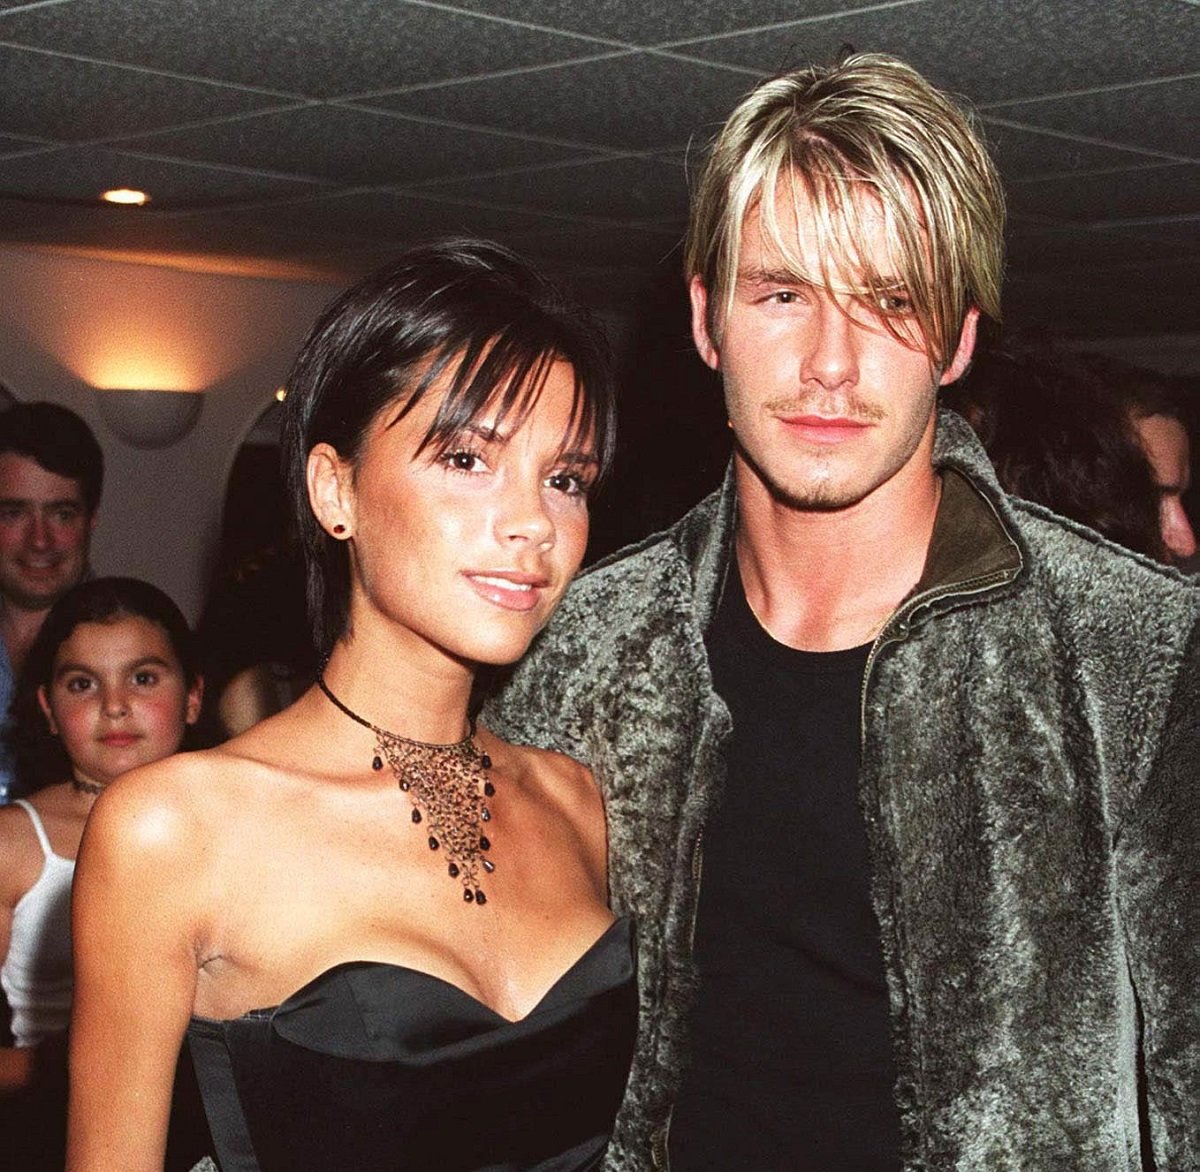 Victoria and David Beckham pose for a photo together backstage after a Whitney Houston concert in 1999